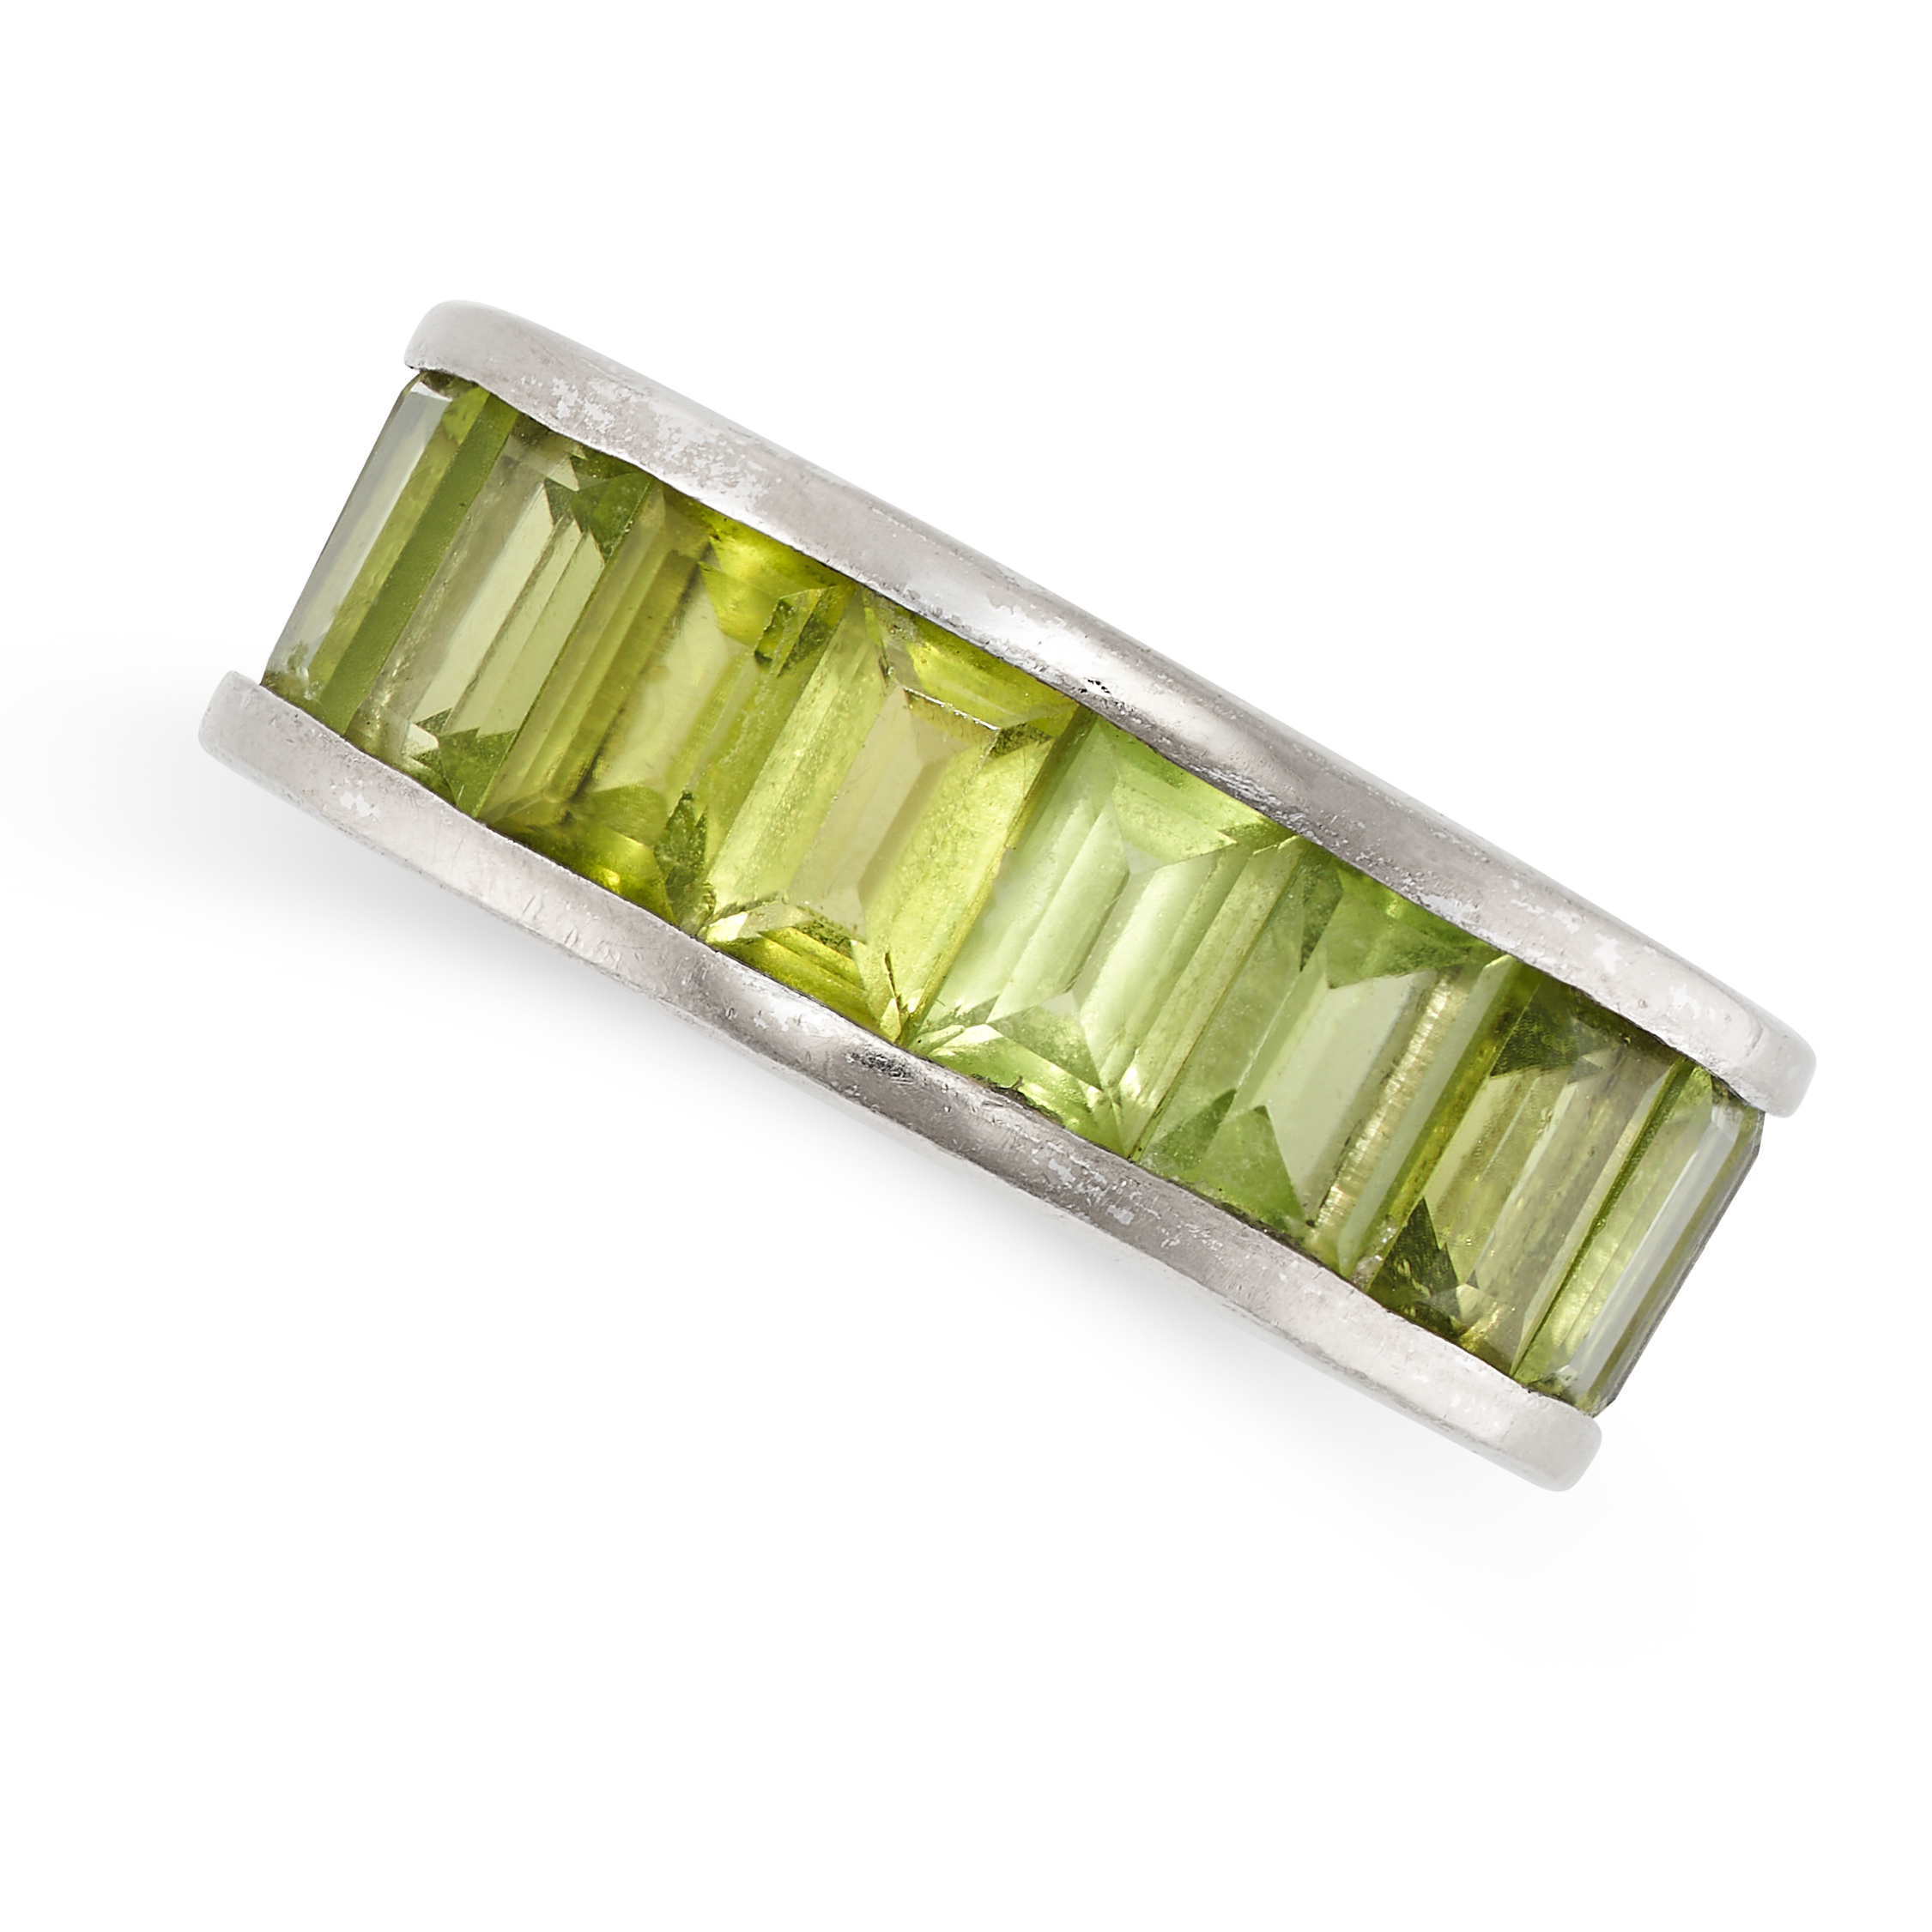 NO RESERVE - A PERIDOT ETERNITY BAND RING in platinum, the band set all around with a single row